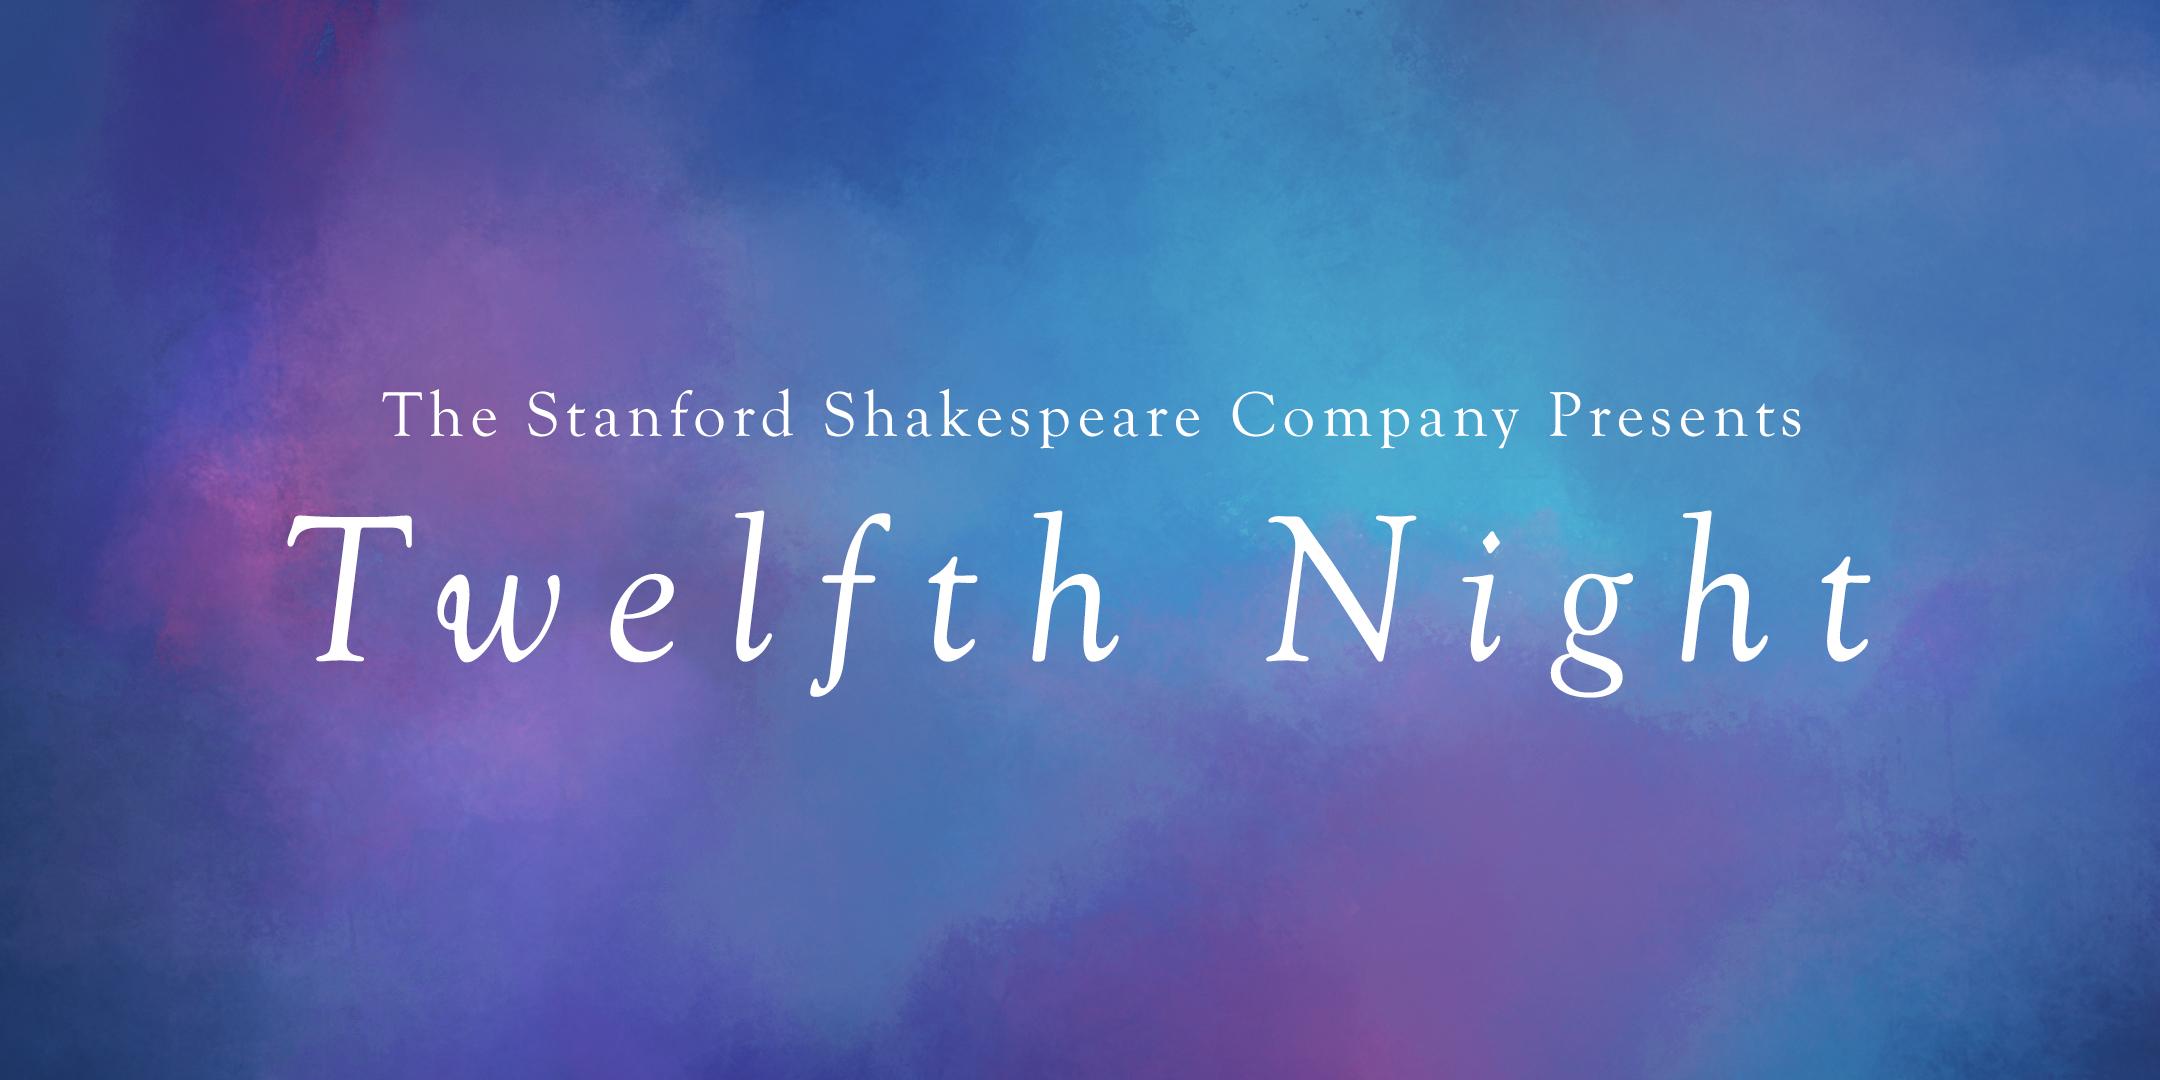 Twelfth Night, or What You Will 